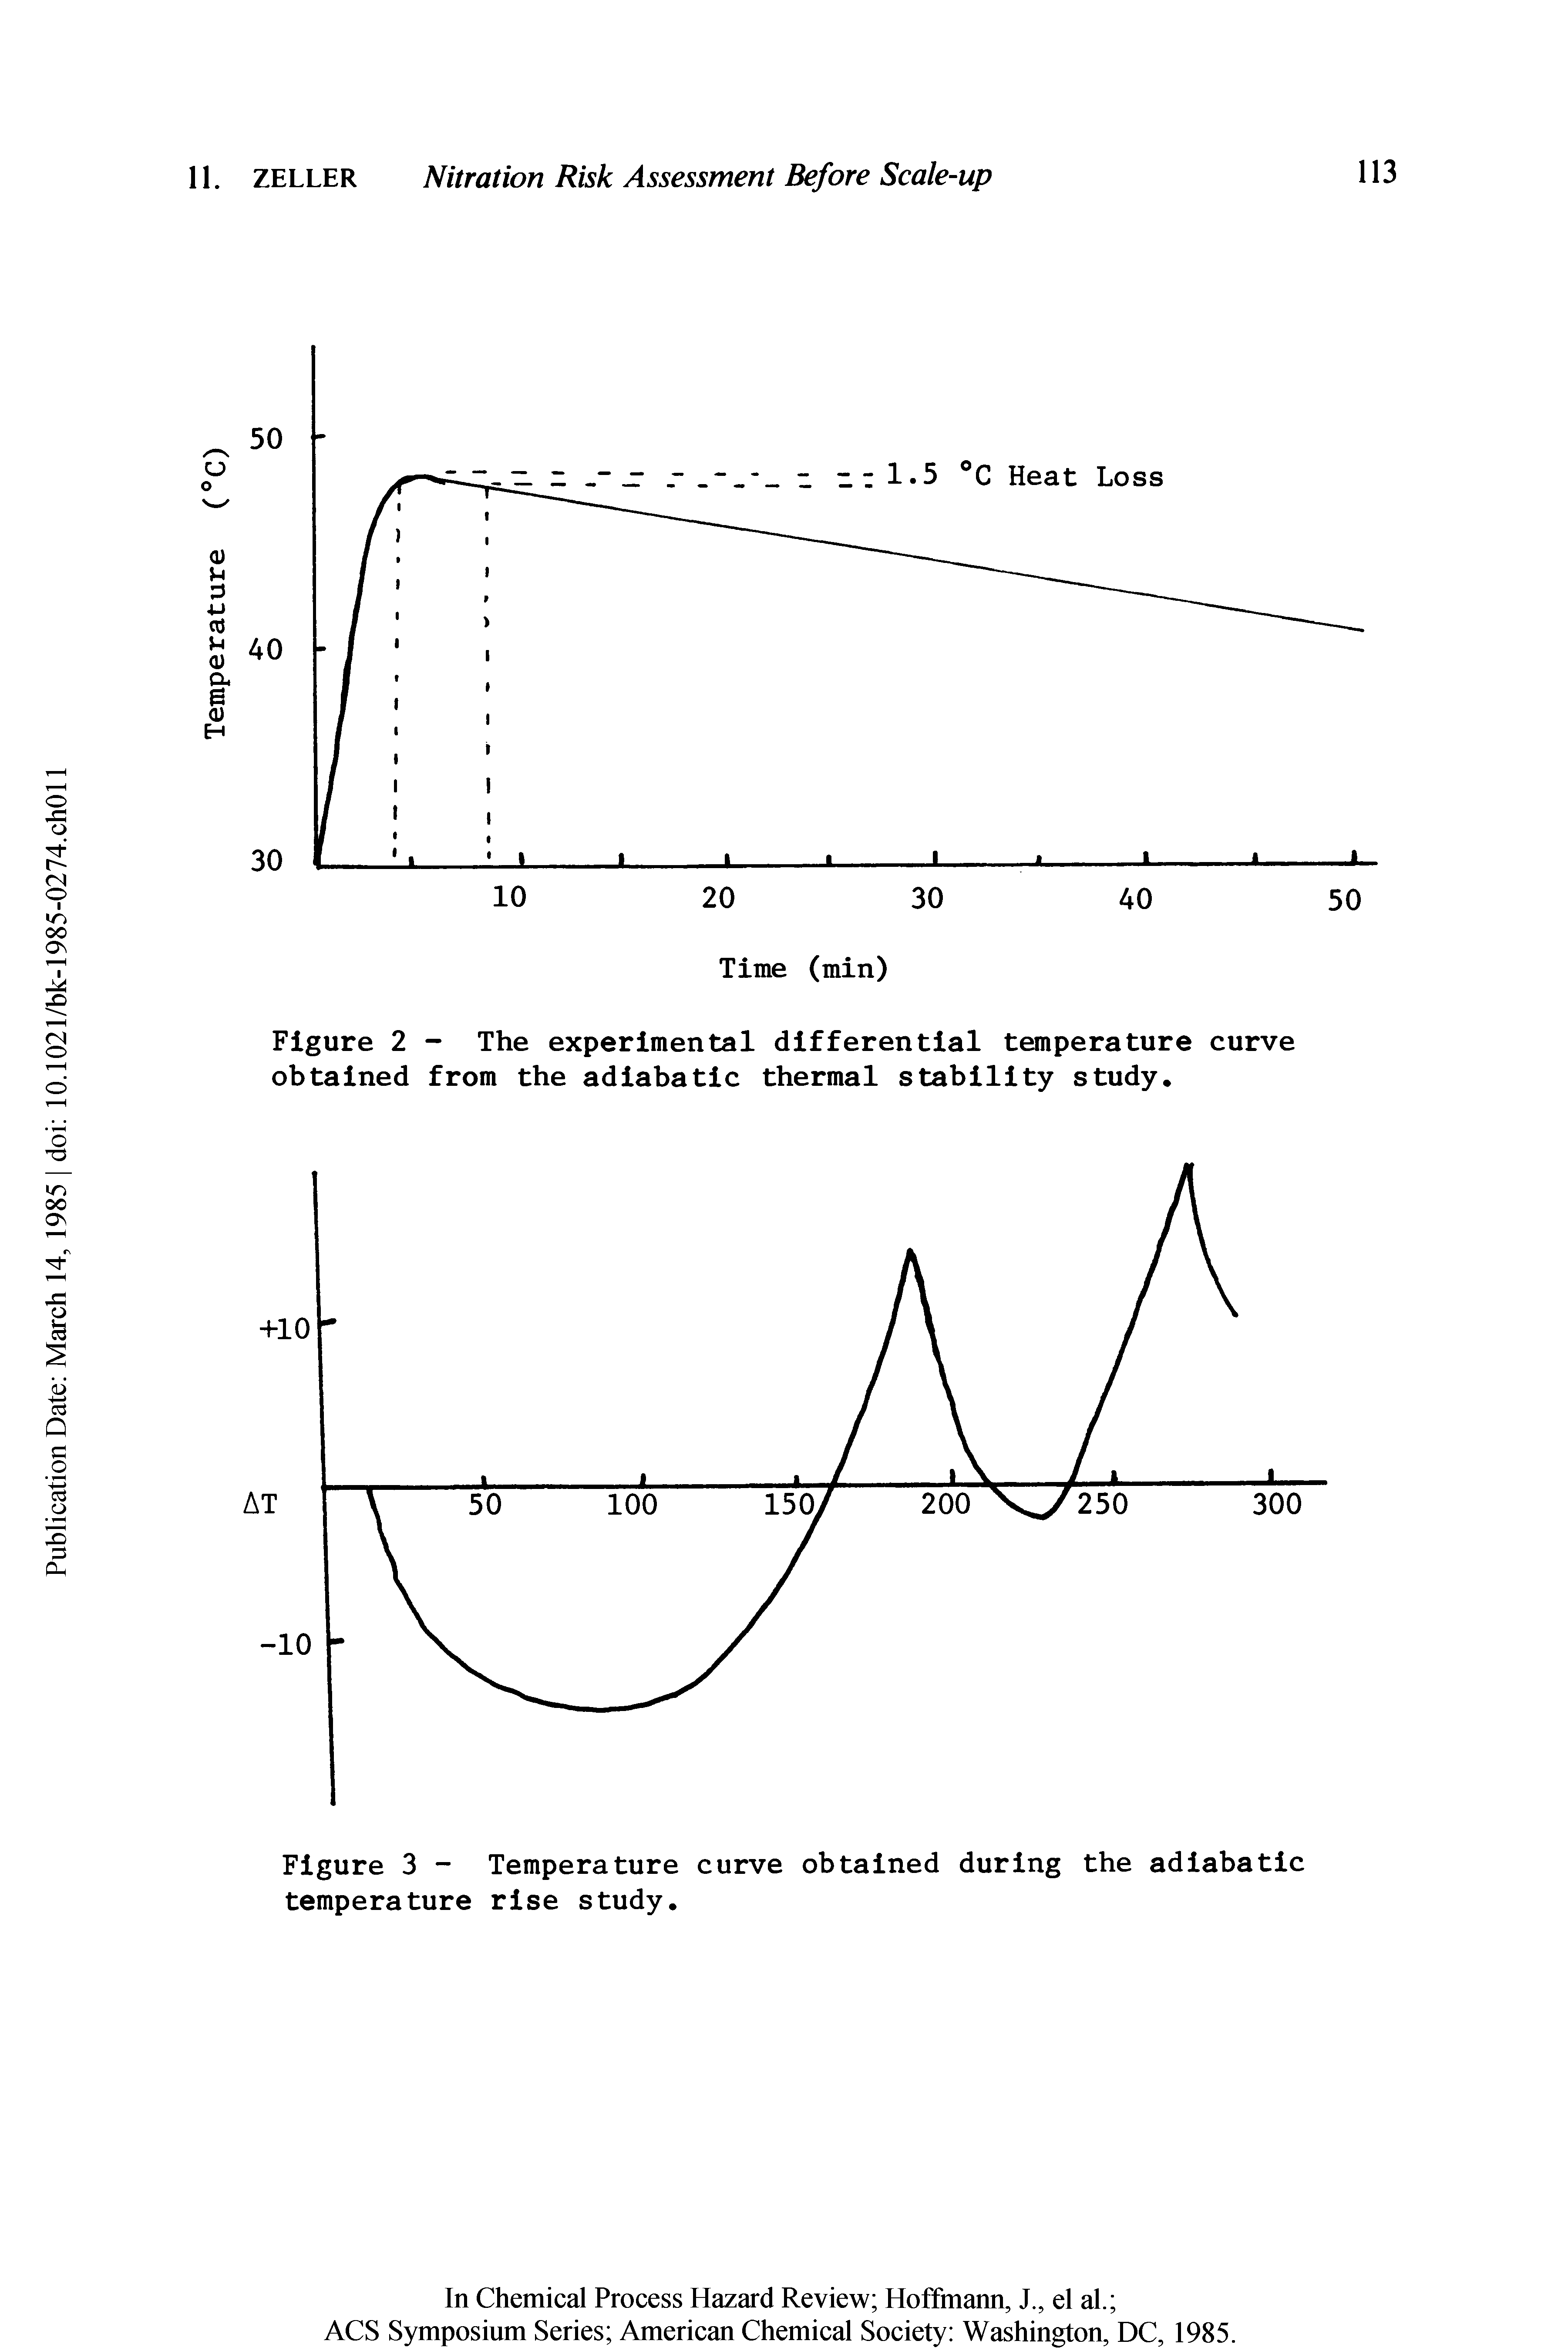 Figure 2 - The experimental differential temperature curve obtained from the adiabatic thermal stability study.